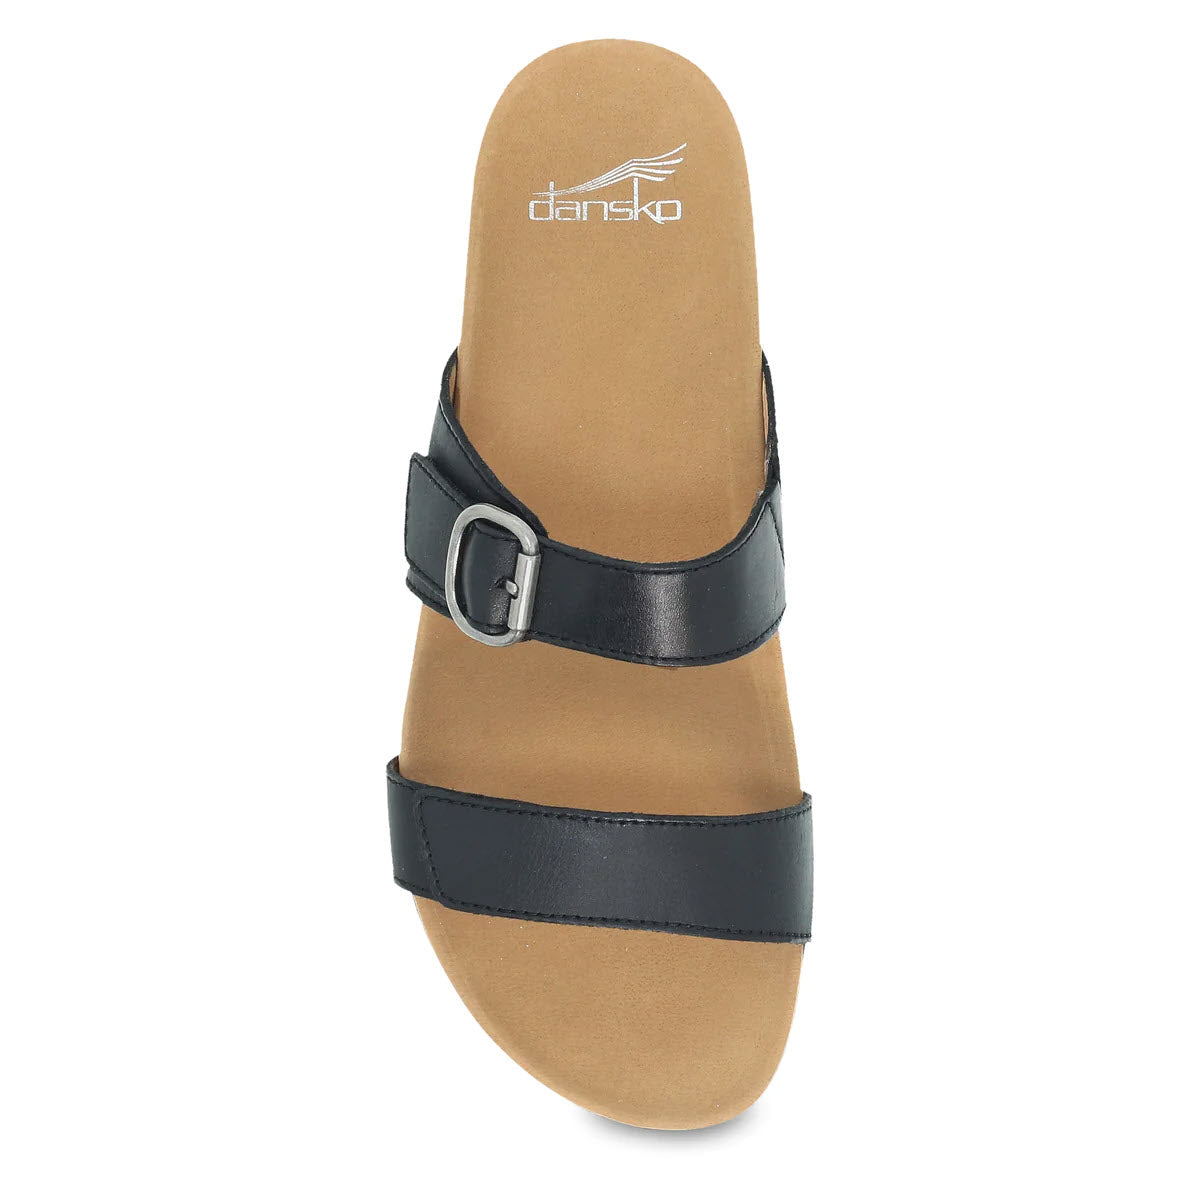 Black Dansko Justine slide sandal with two straps and a buckle, perfect for casual all-day wear, on a white background.